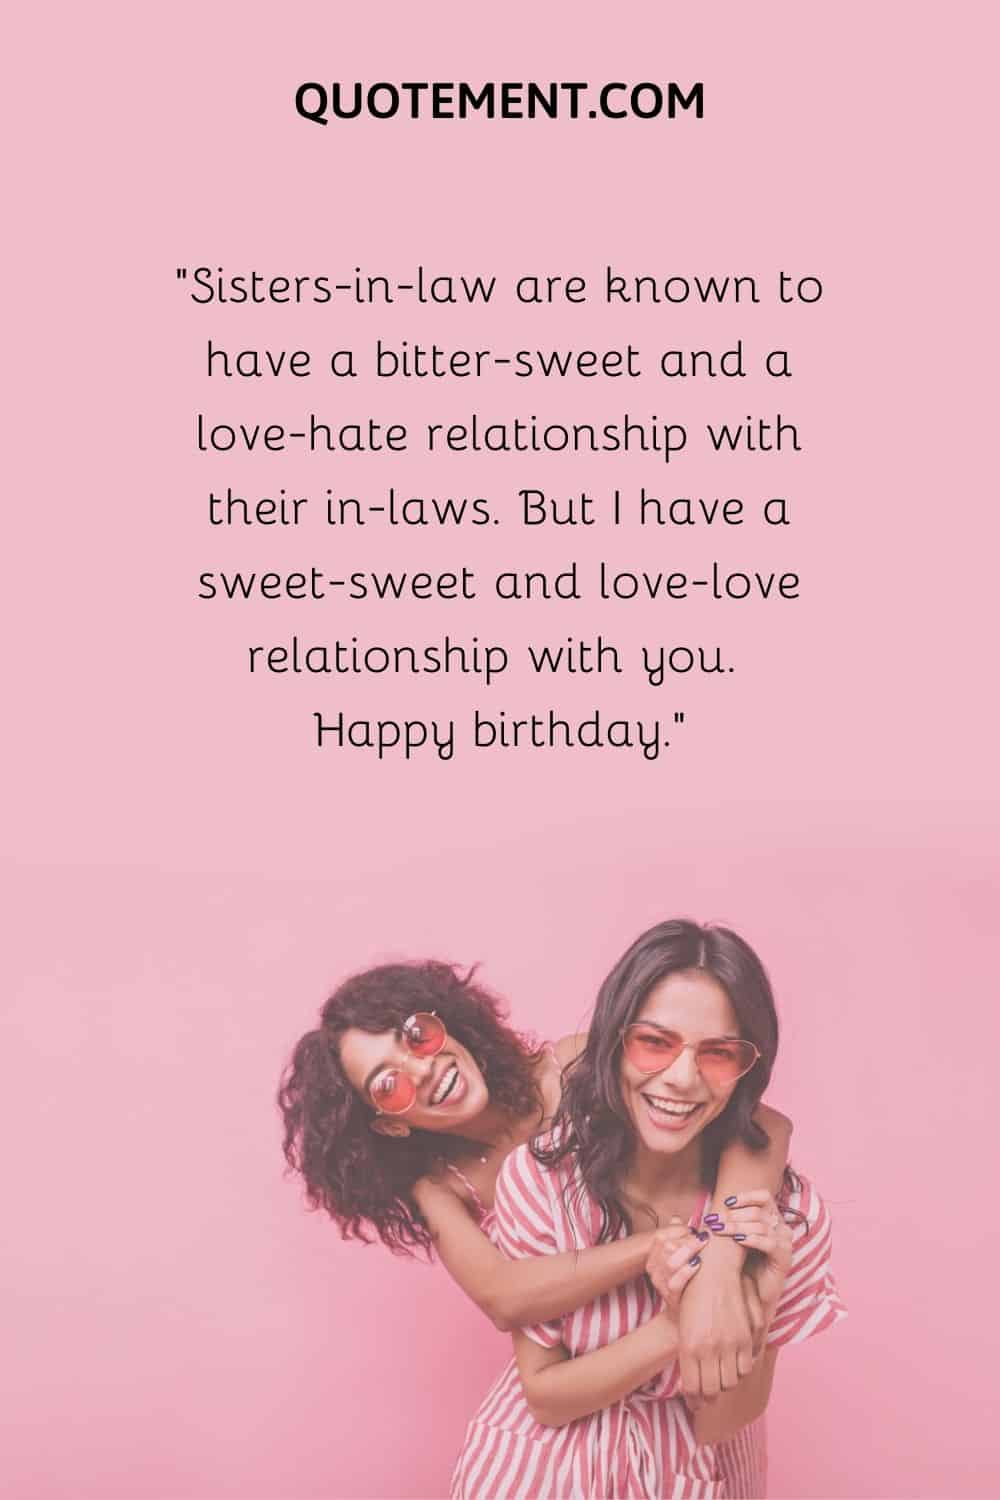 Sisters-in-law are known to have a bitter-sweet and a love-hate relationship with their in-laws.